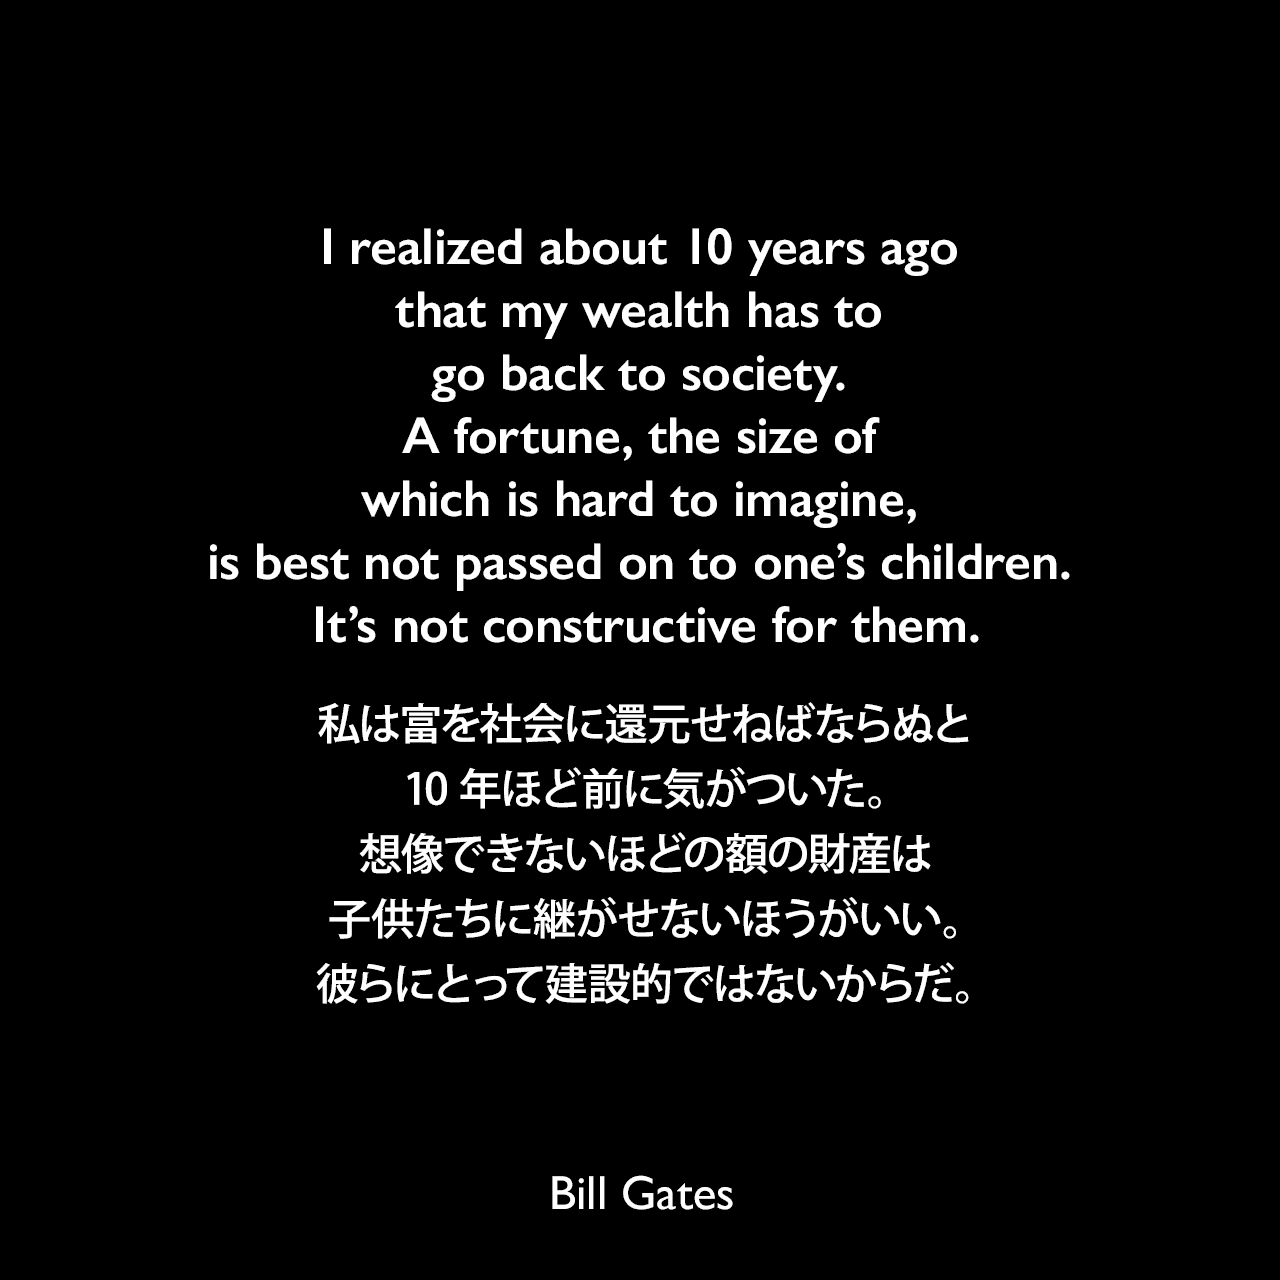 I realized about 10 years ago that my wealth has to go back to society. A fortune, the size of which is hard to imagine, is best not passed on to one’s children. It’s not constructive for them.私は富を社会に還元せねばならぬと、10年ほど前に気がついた。想像できないほどの額の財産は、子供たちに継がせないほうがいい。彼らにとって建設的ではないからだ。Bill Gates